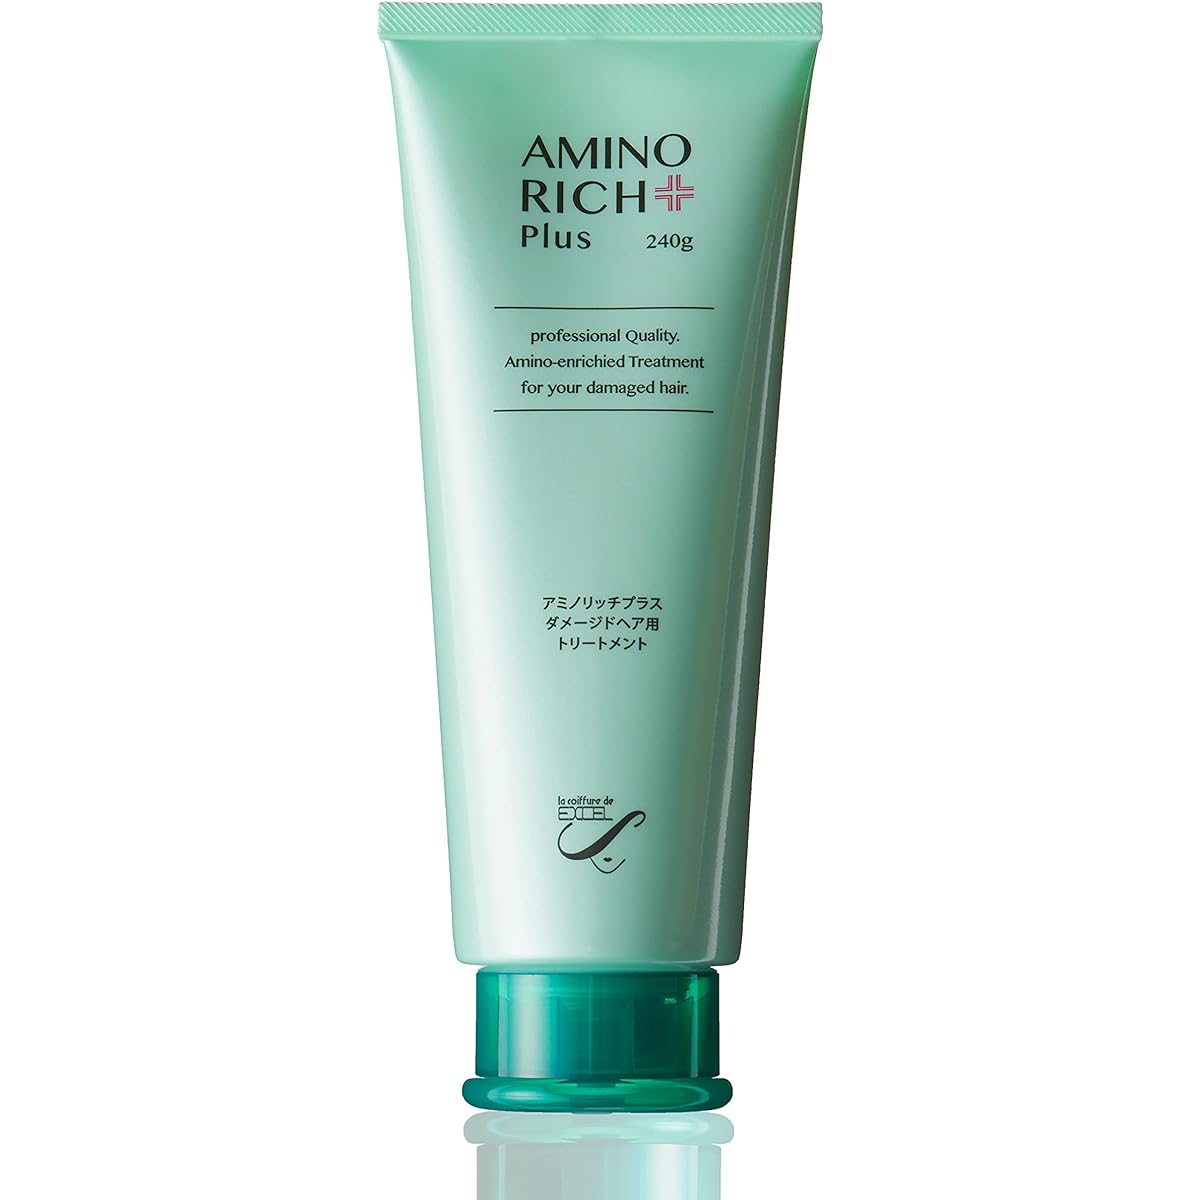 + ar amino rich + Amino rich treatment for damaged hair Contains carefully selected amino acids Amino acid treatment Scalp 240g Plant-derived damage repair